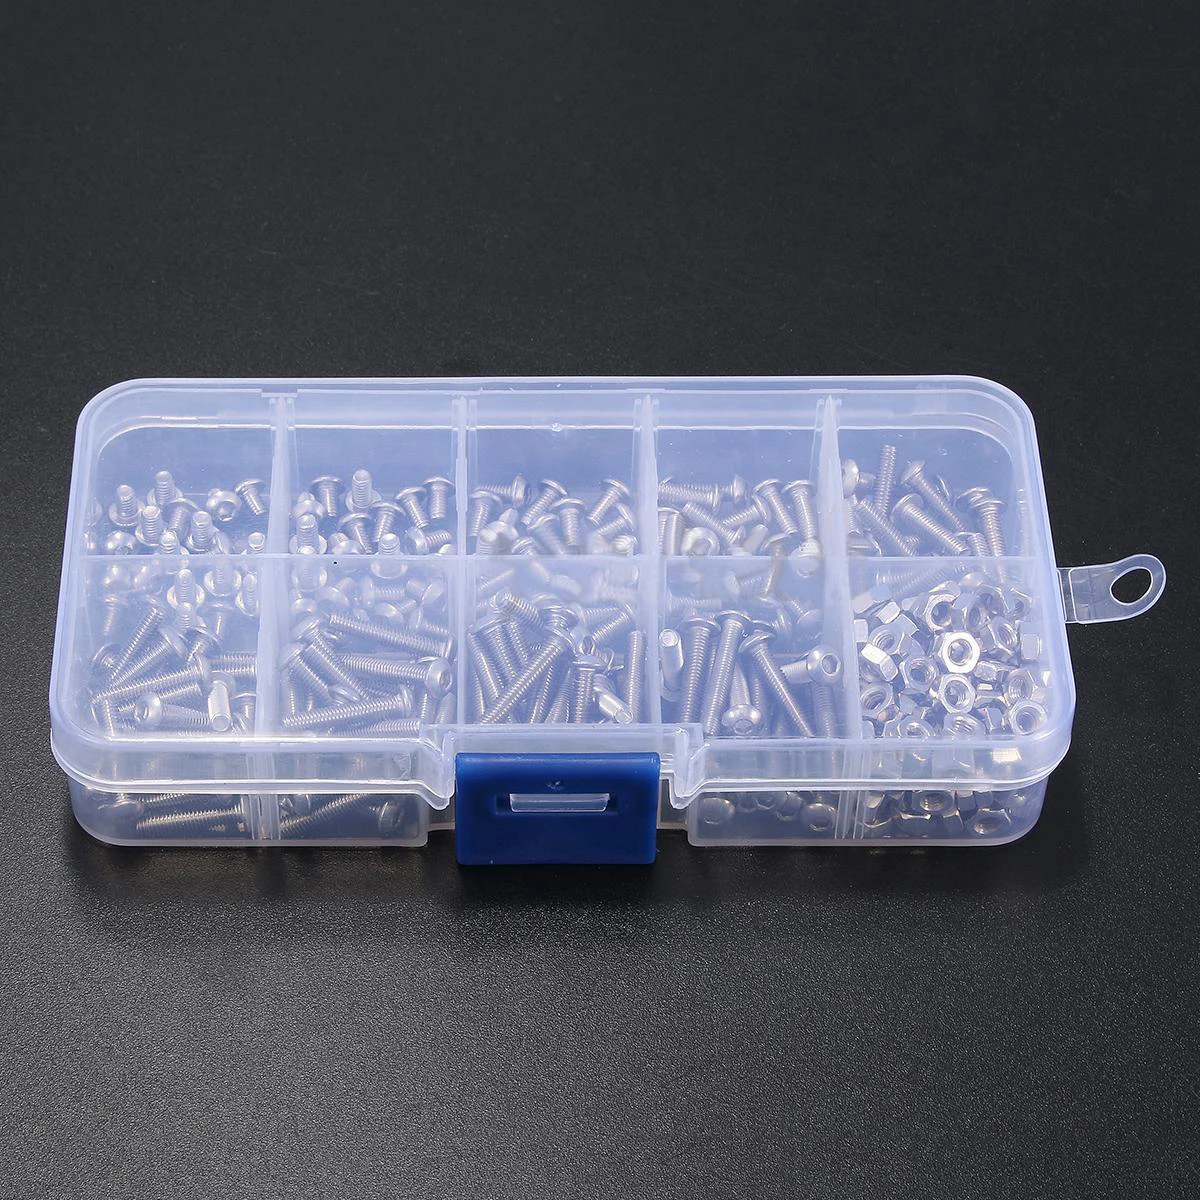 340pcs Assorted Stainless Steel M3 Screw 5/6/8/10/12/14/16/18/20mm with Hex Nuts Bolt Cap Socket Set